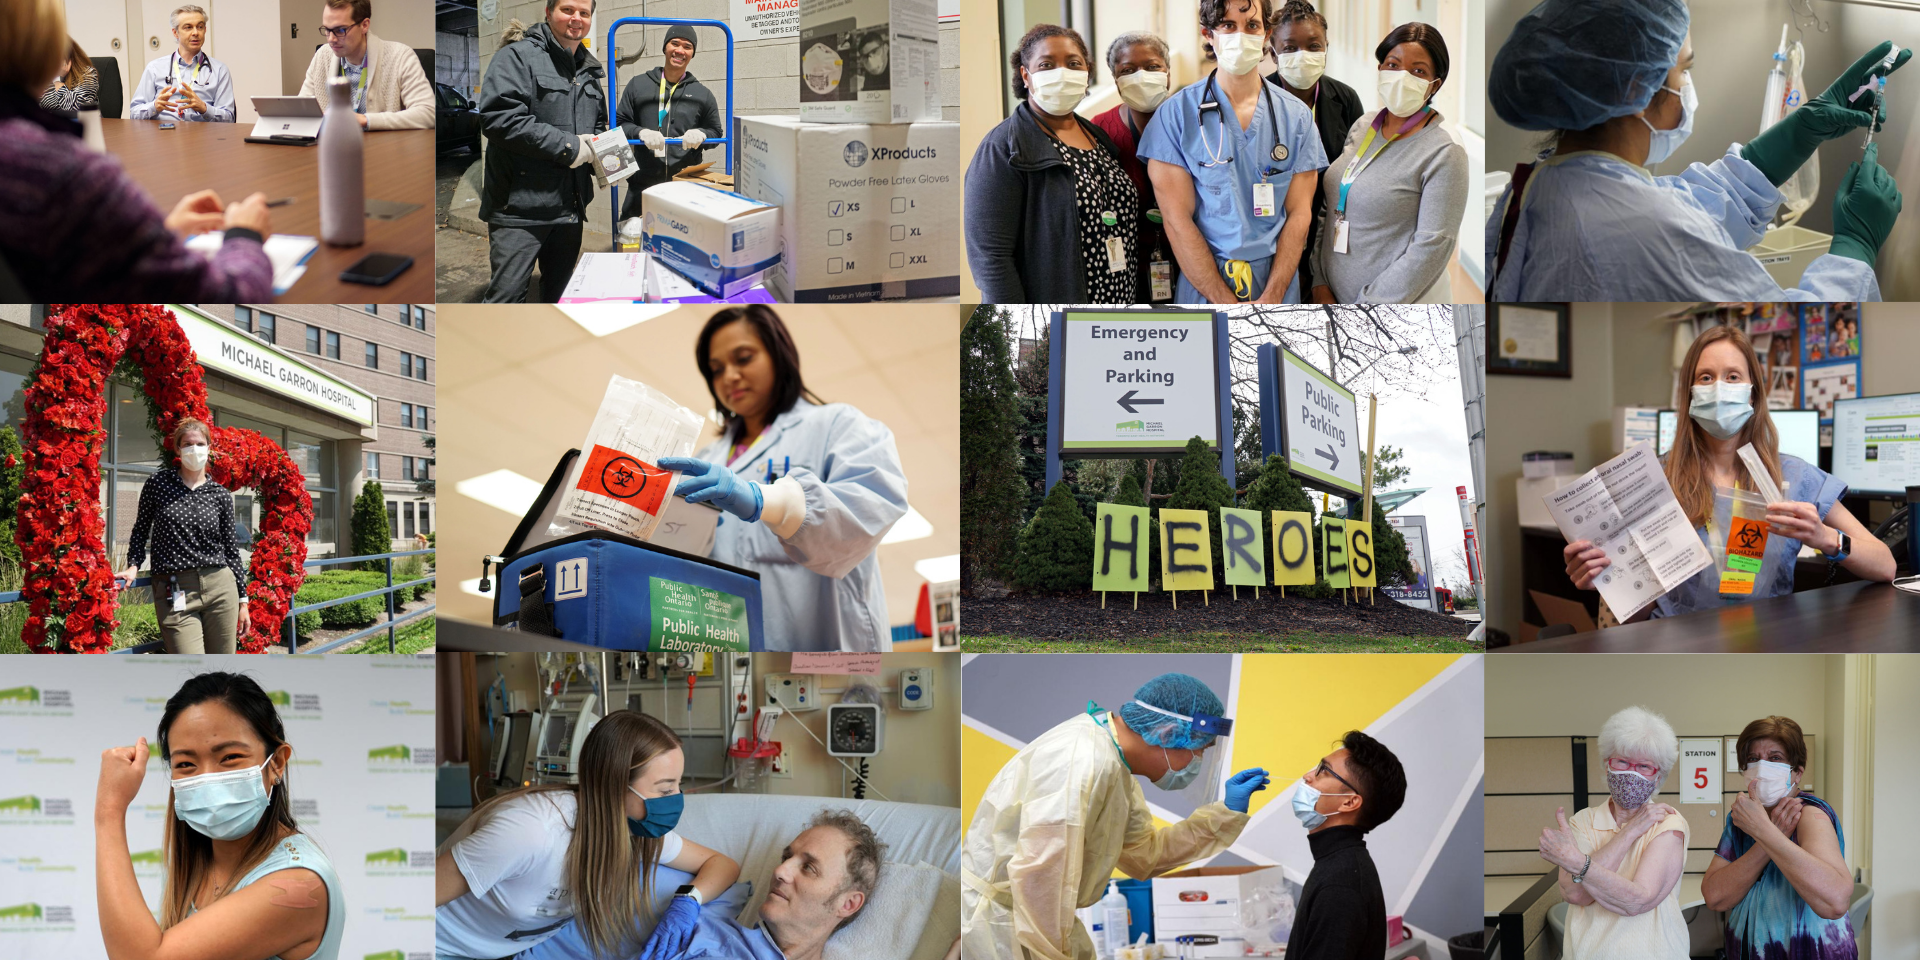 Photographs of our staff, physicians and community members capture a year into the COVID-19 pandemic at MGH.